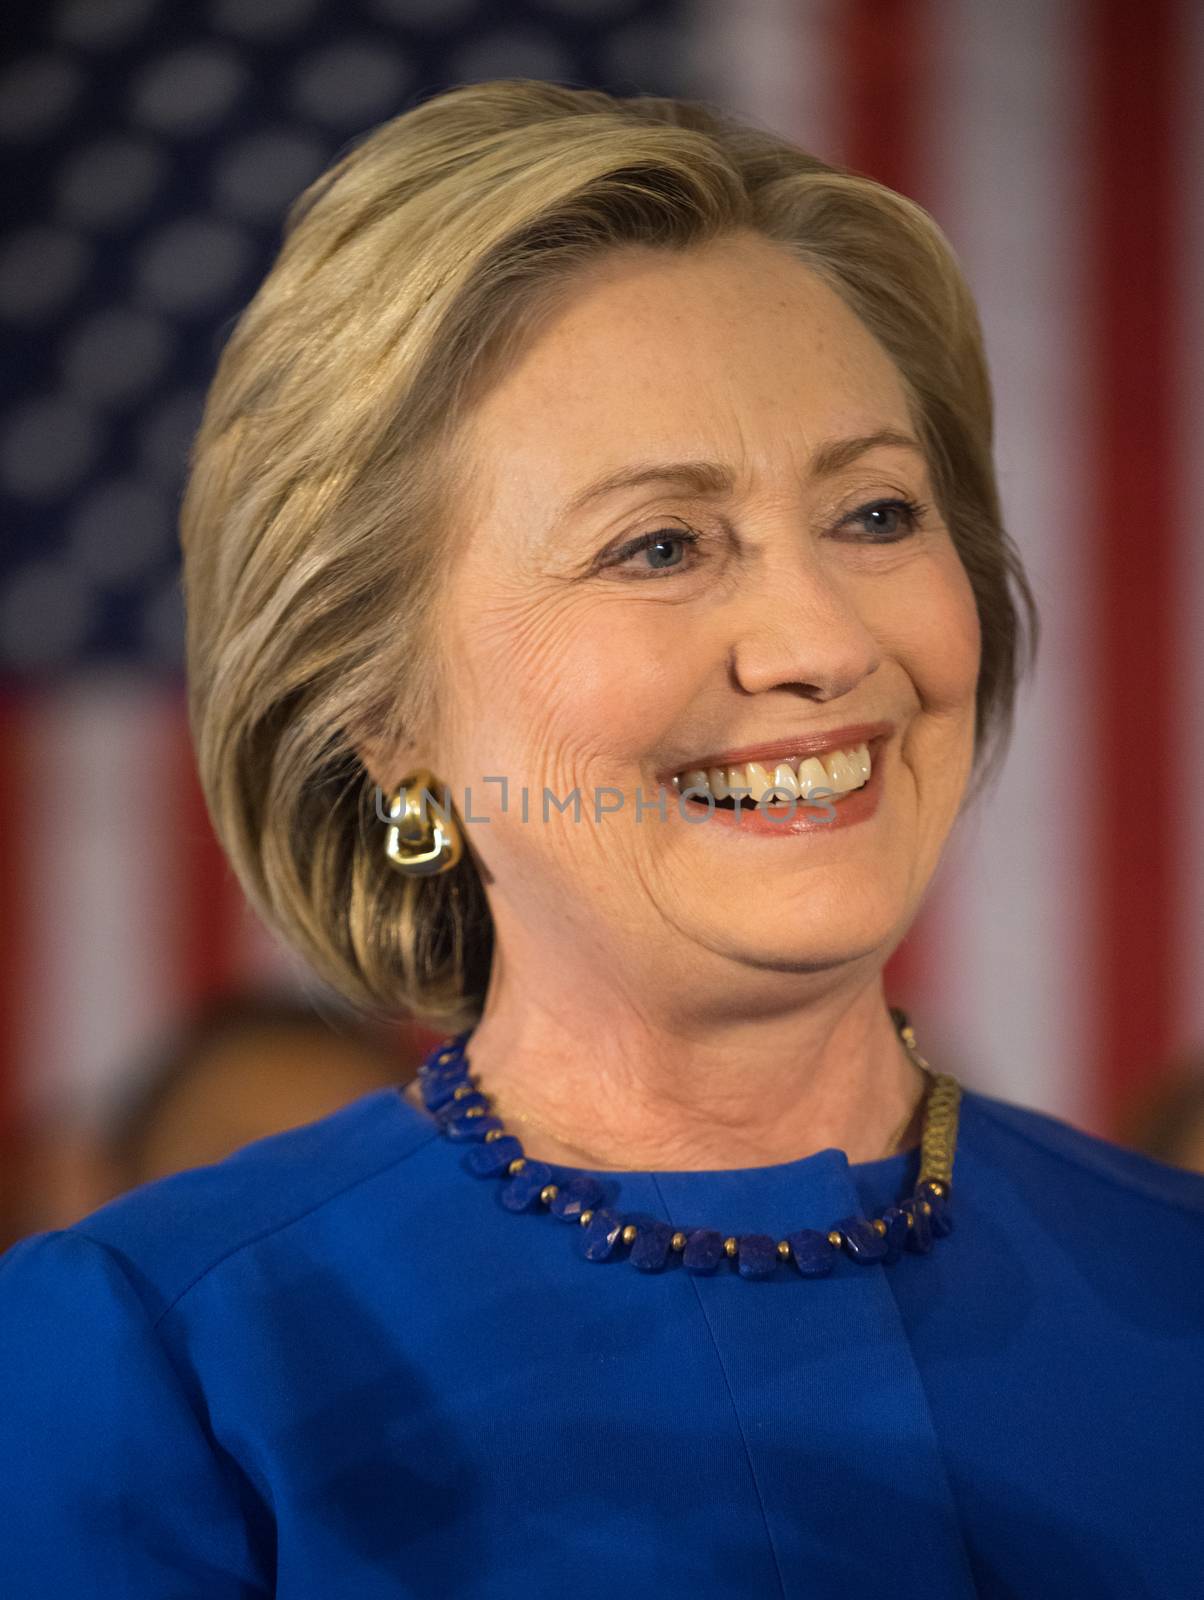 USA, Bronzeville: Democratic presidential hopeful Hillary Clinton smiles during her Get Out and Vote campaign rally at the Parkway Ballroom in Bronzeville, Chicago on February 17, 2016.  At the event, Clinton was joined on stage by Geneva Reed-Veal, mother of the late Sandra Bland.